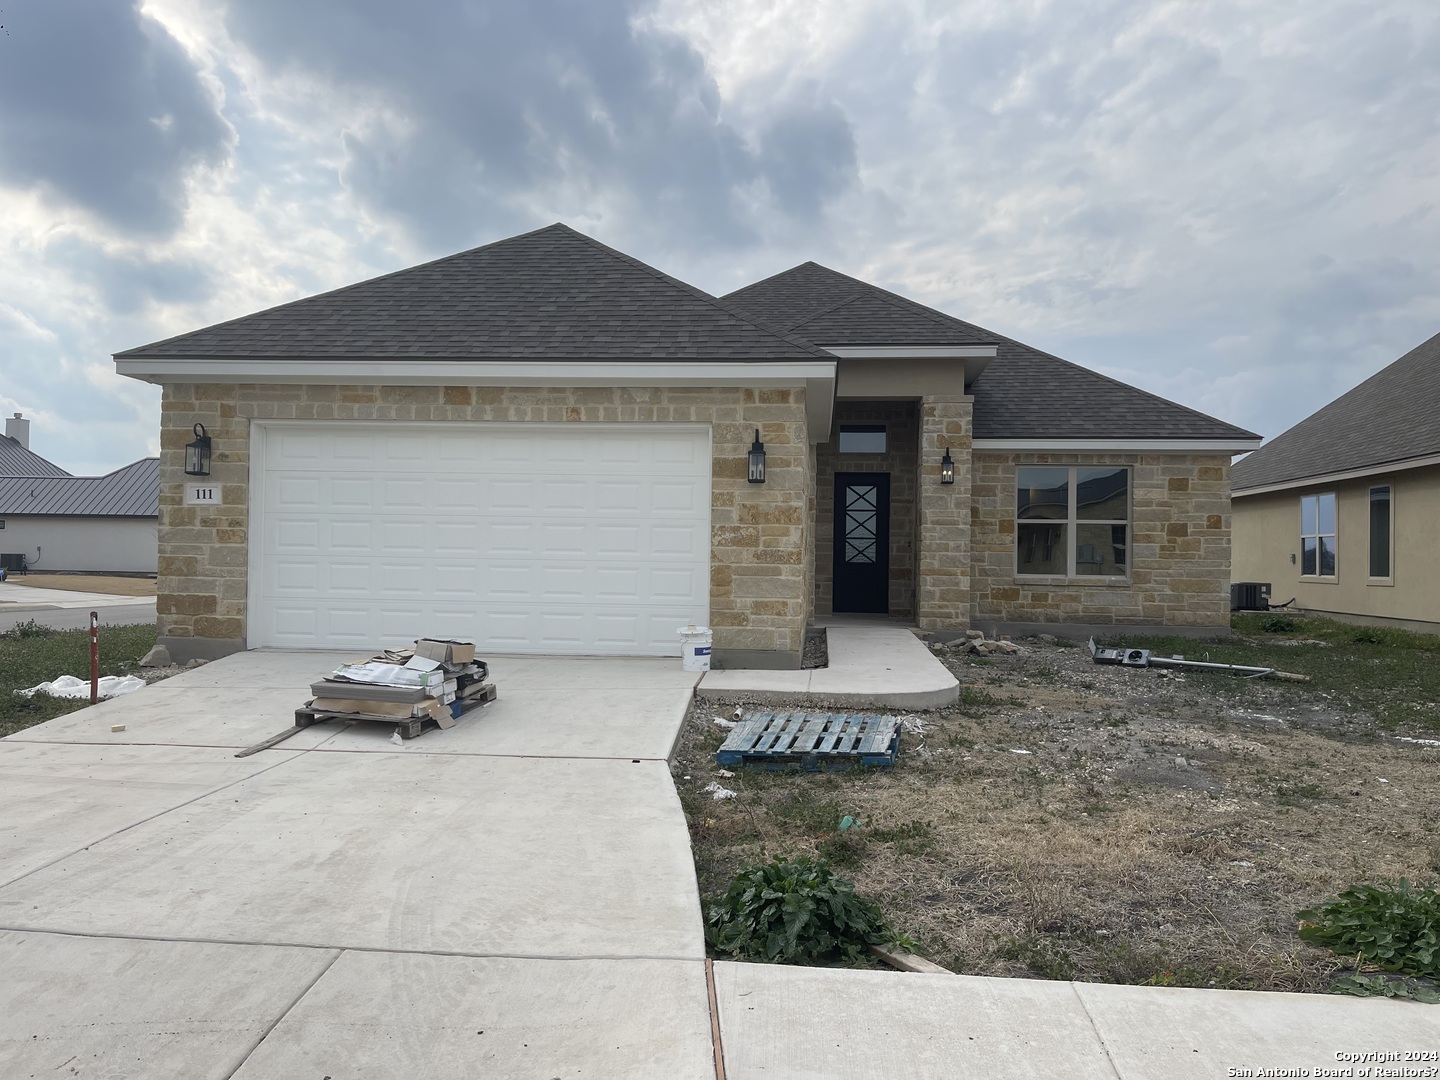 Photo of 111 John T Ct in Castroville, TX